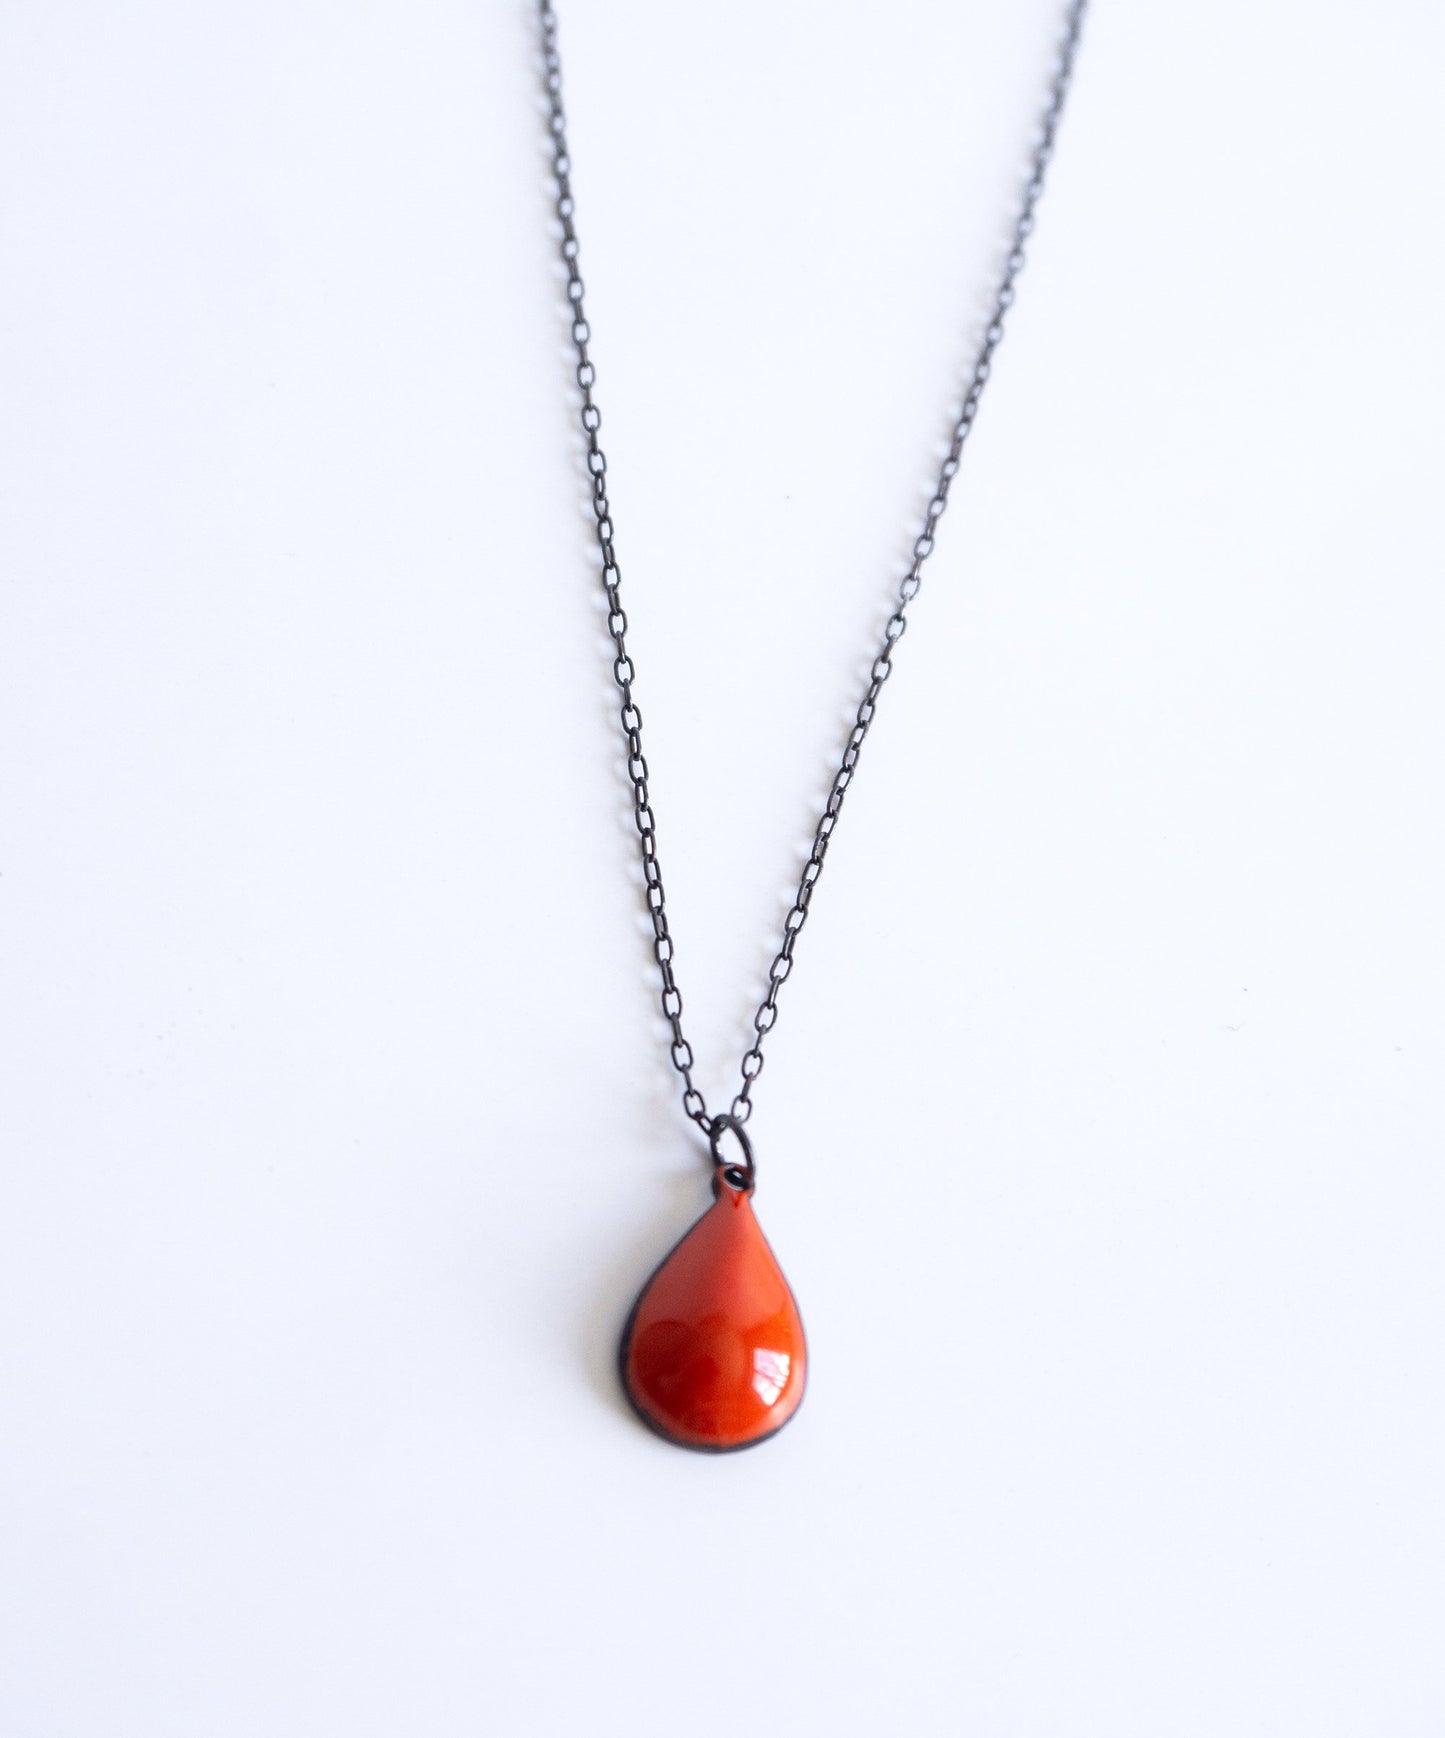 black sterling silver chain with red drop